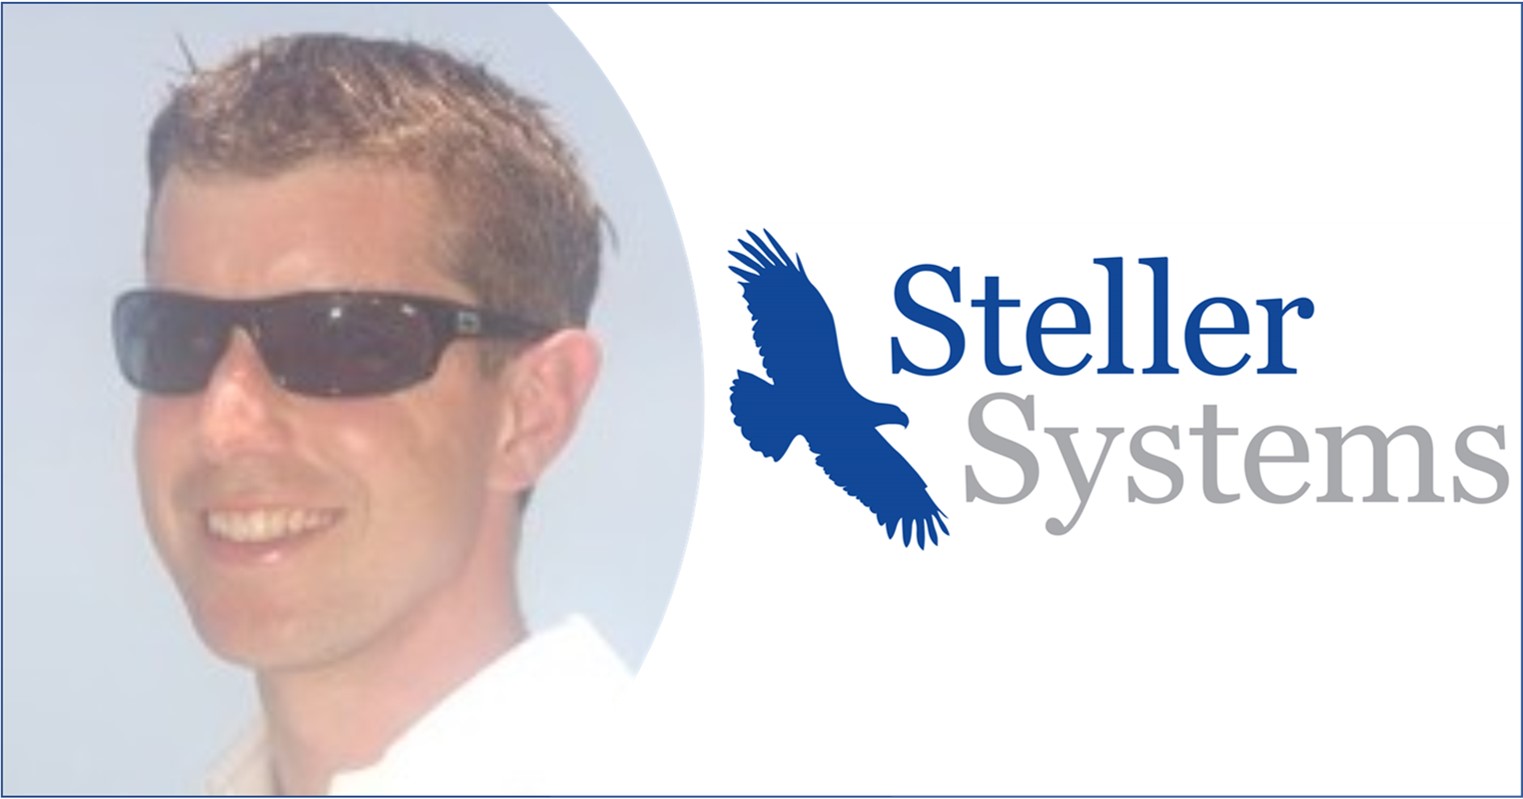 Welcome system. Christian Steller i want-.